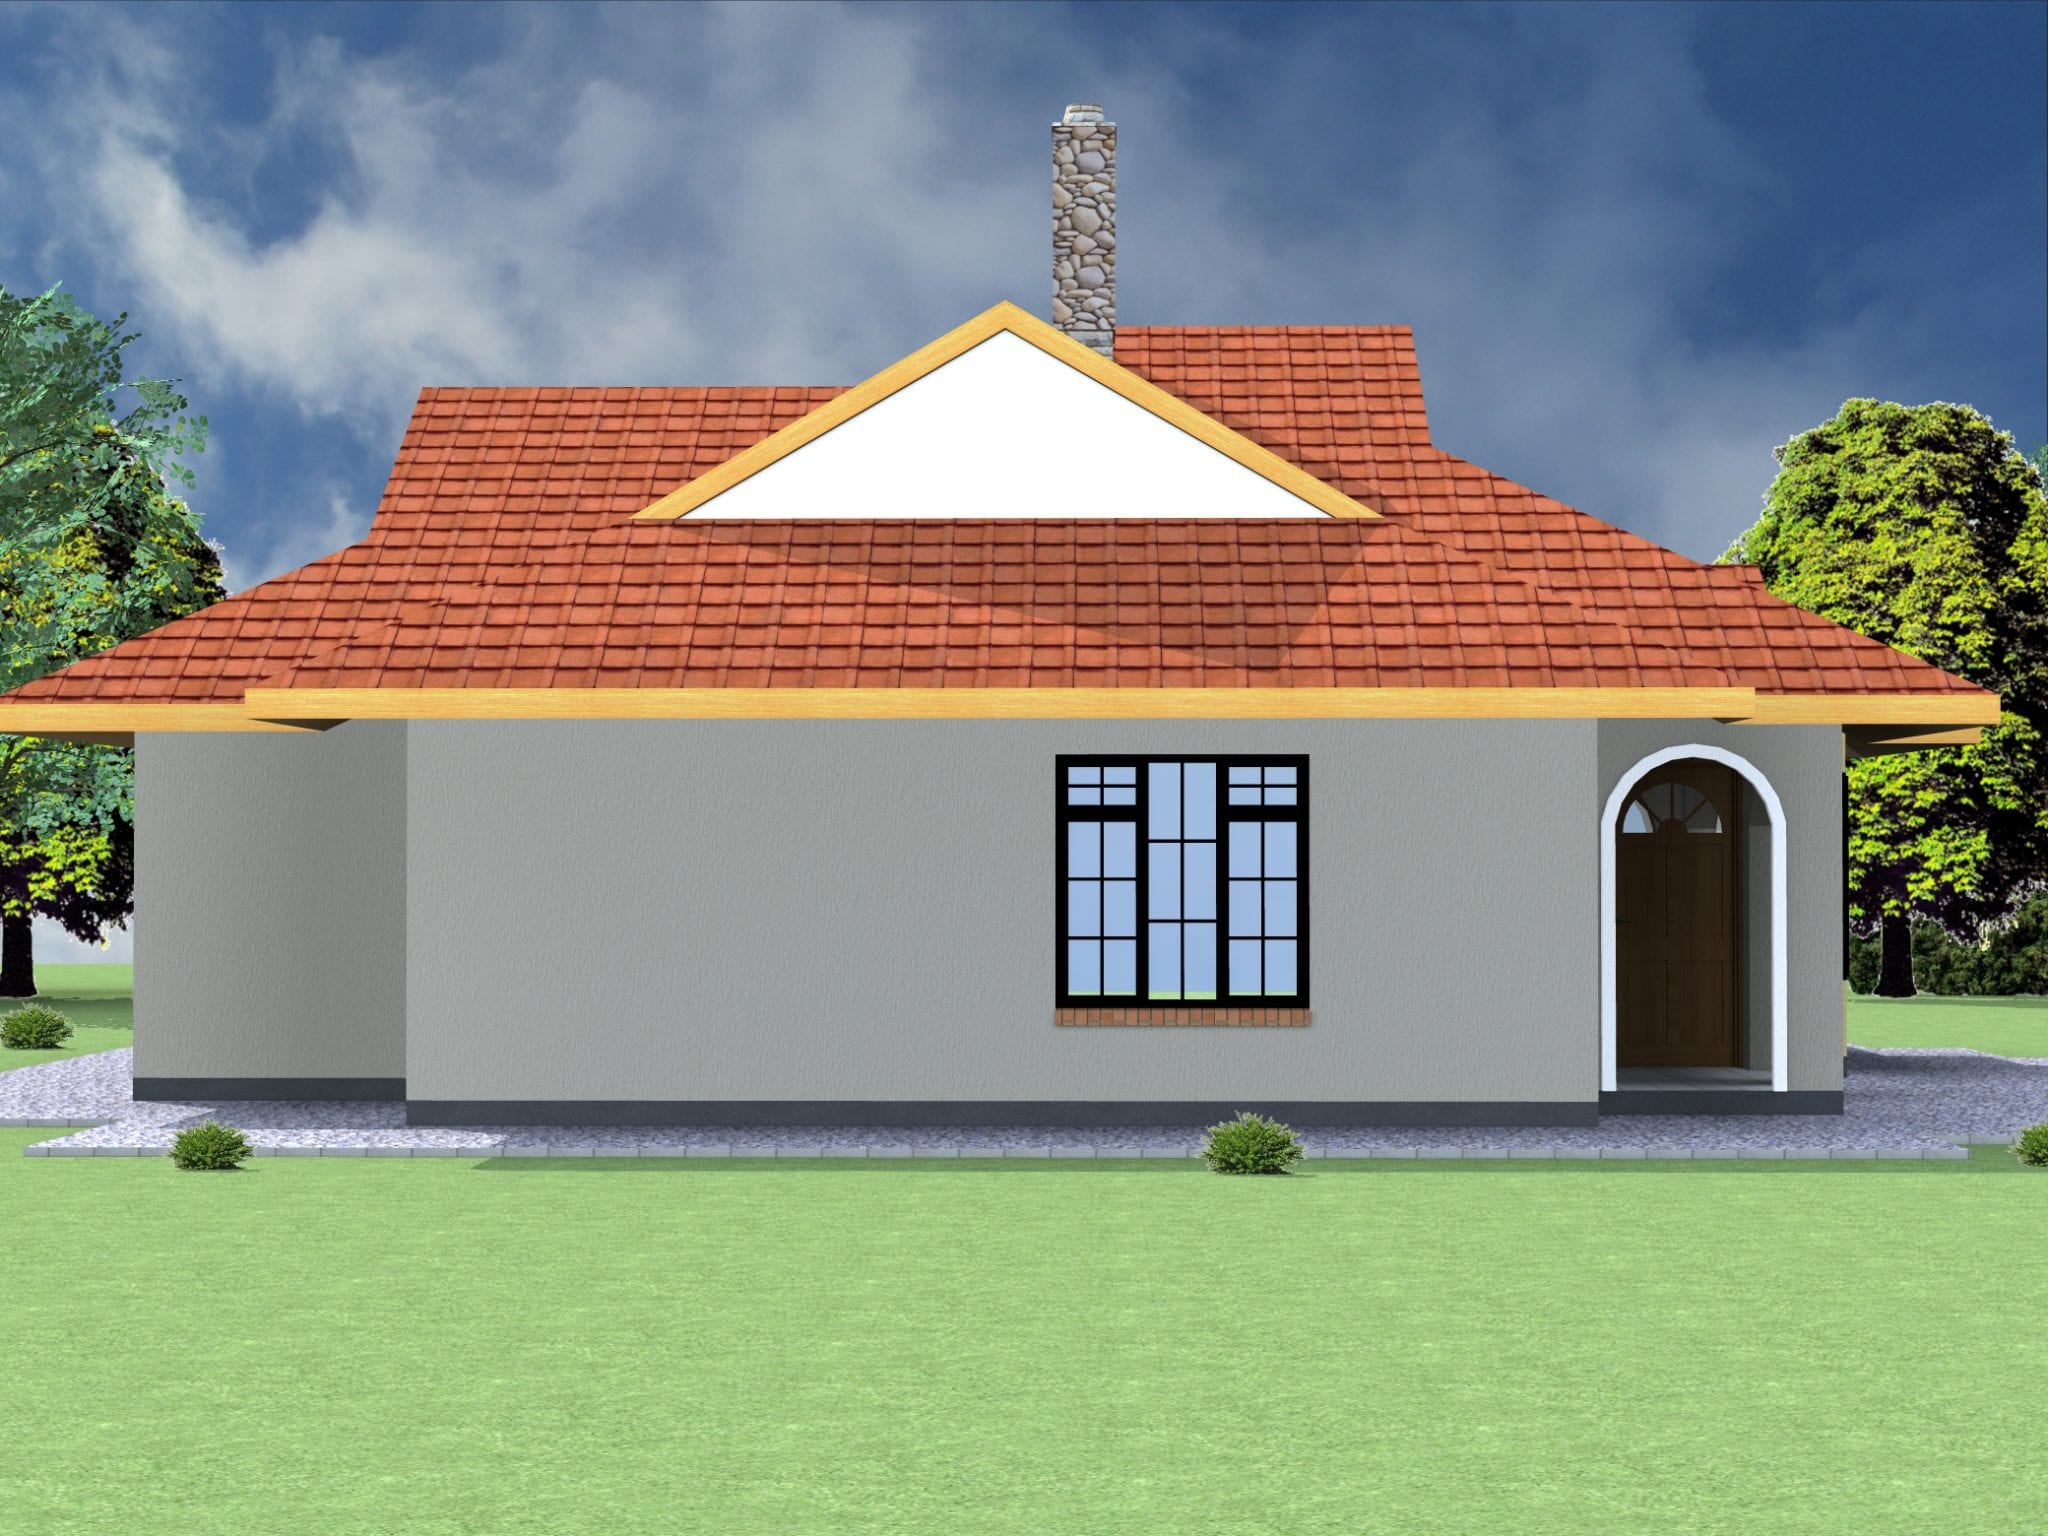  3  bedroom  house  plan  with dimensions  HPD Consult